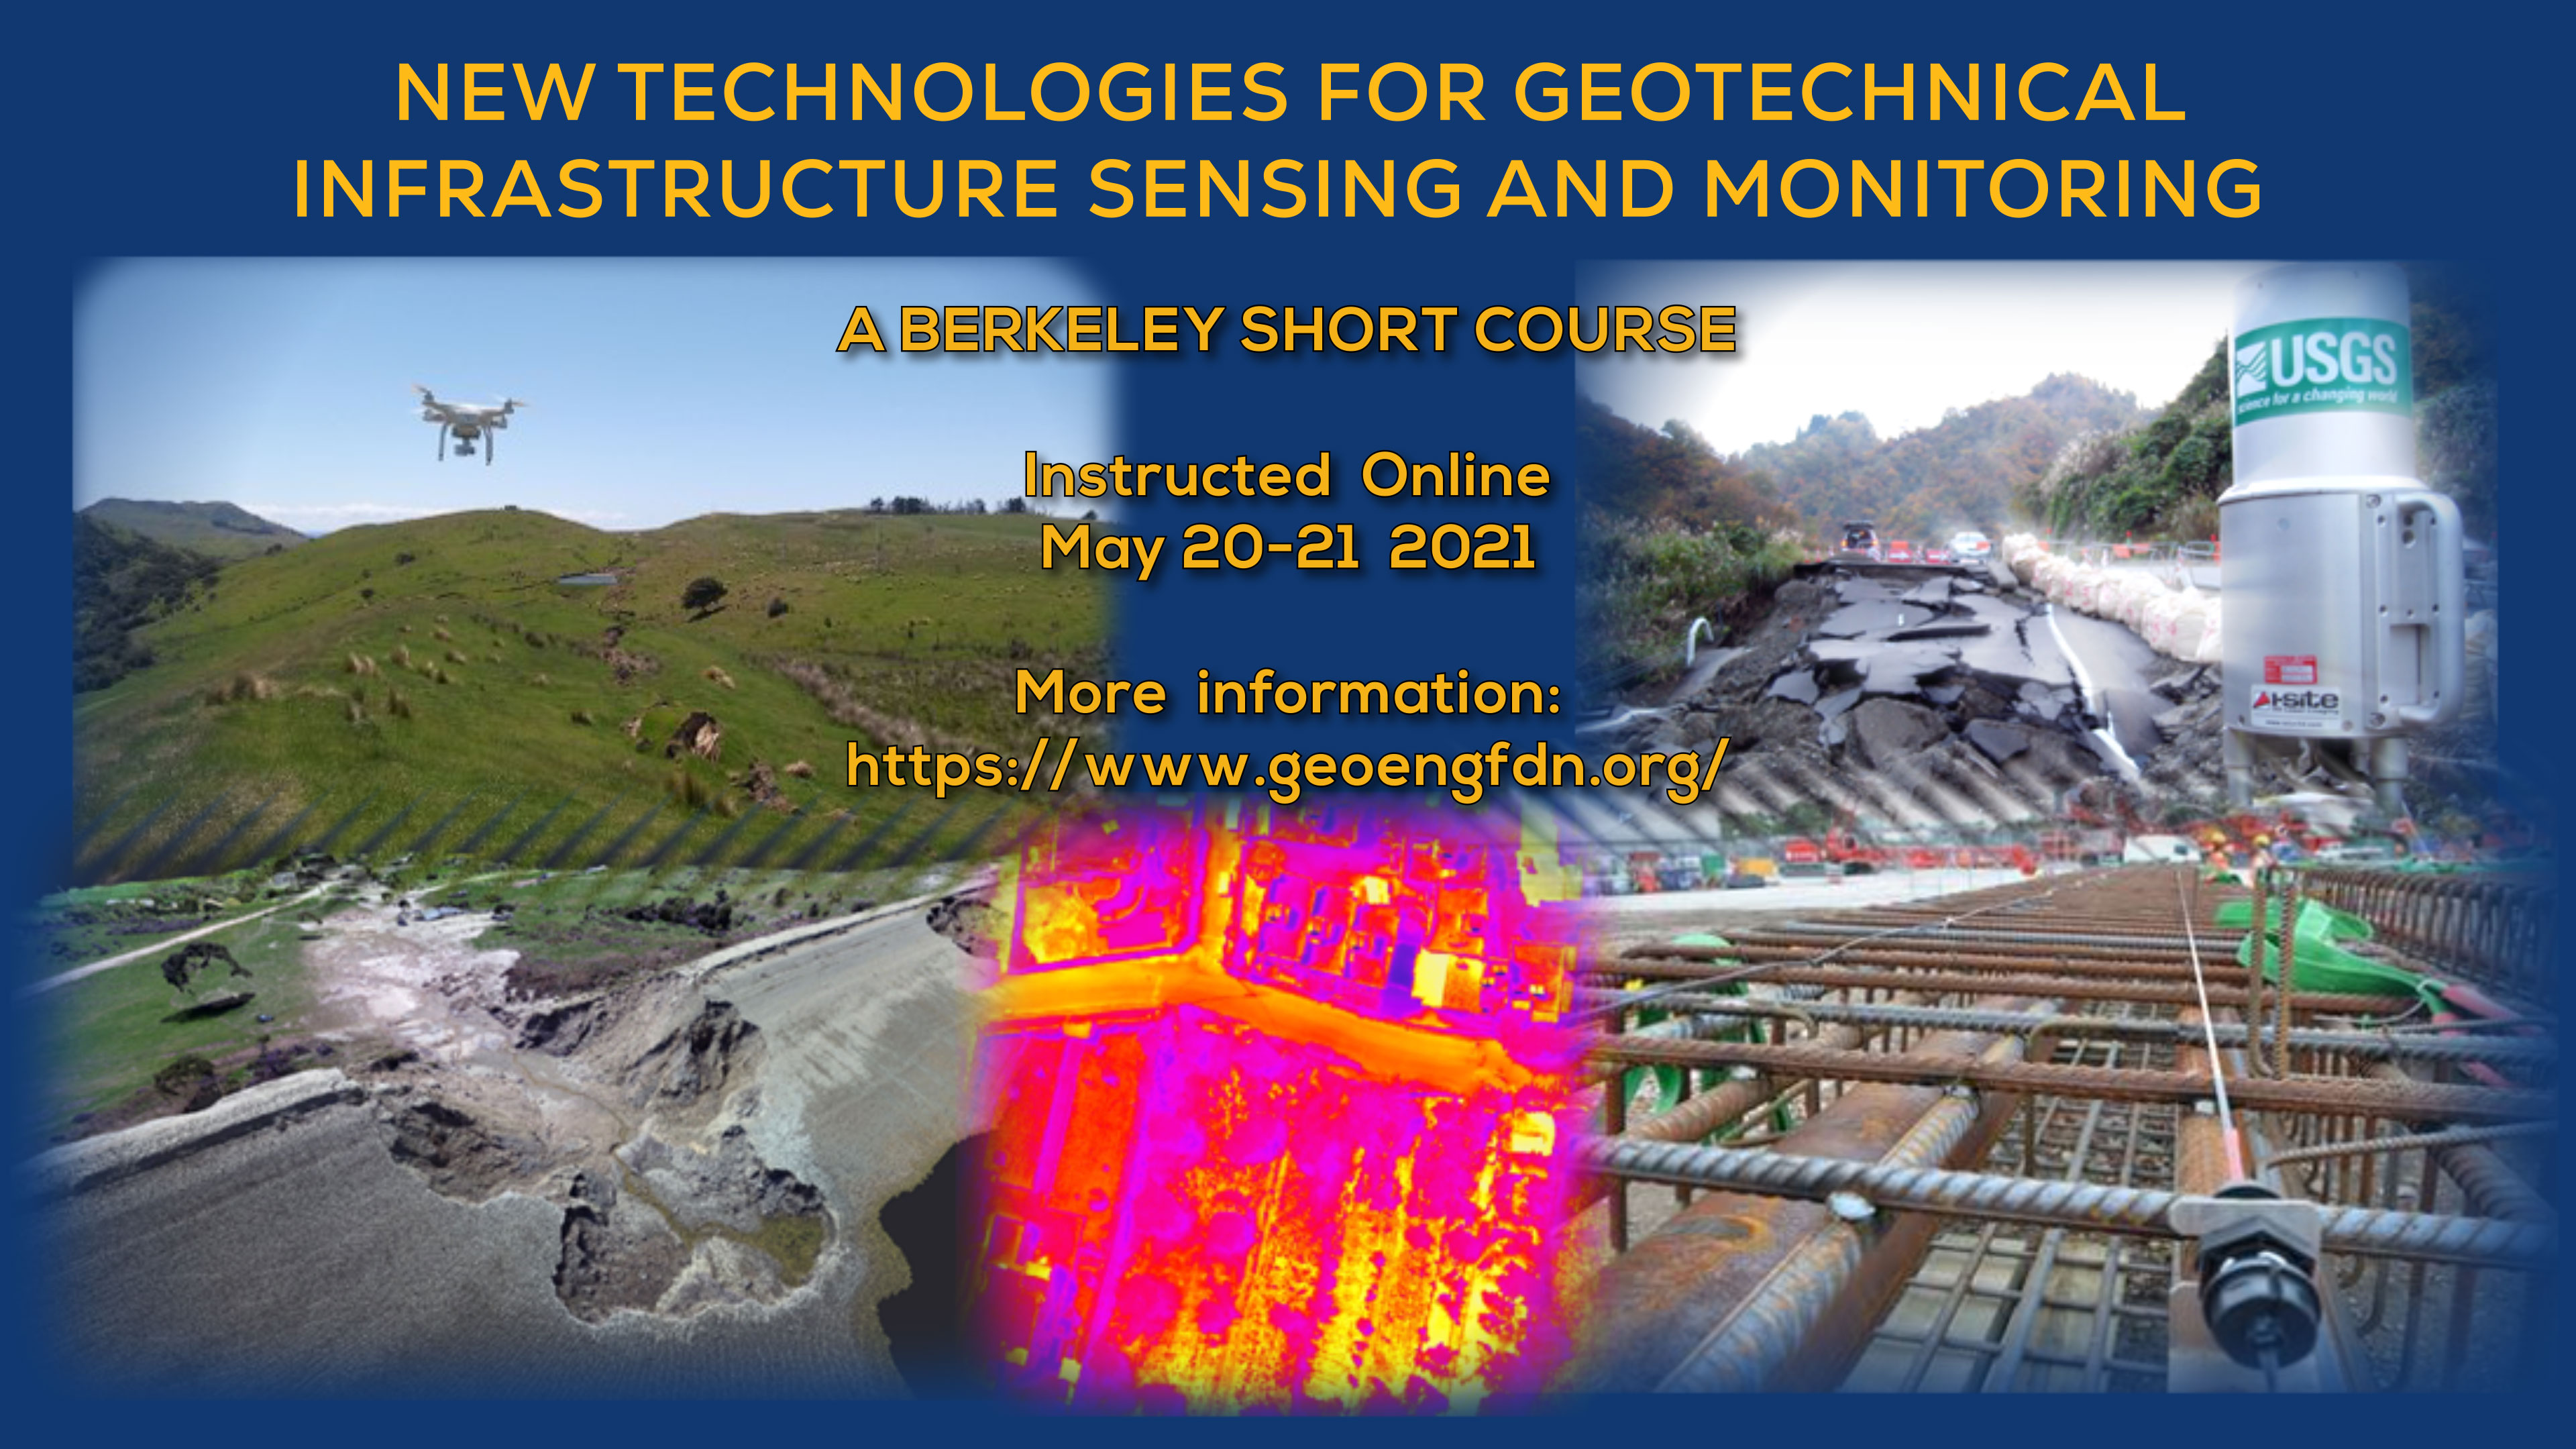 May 20-21 2021 Short Course on "New Technologies for Geotechnical Infrastructure Sensing and Monitoring"